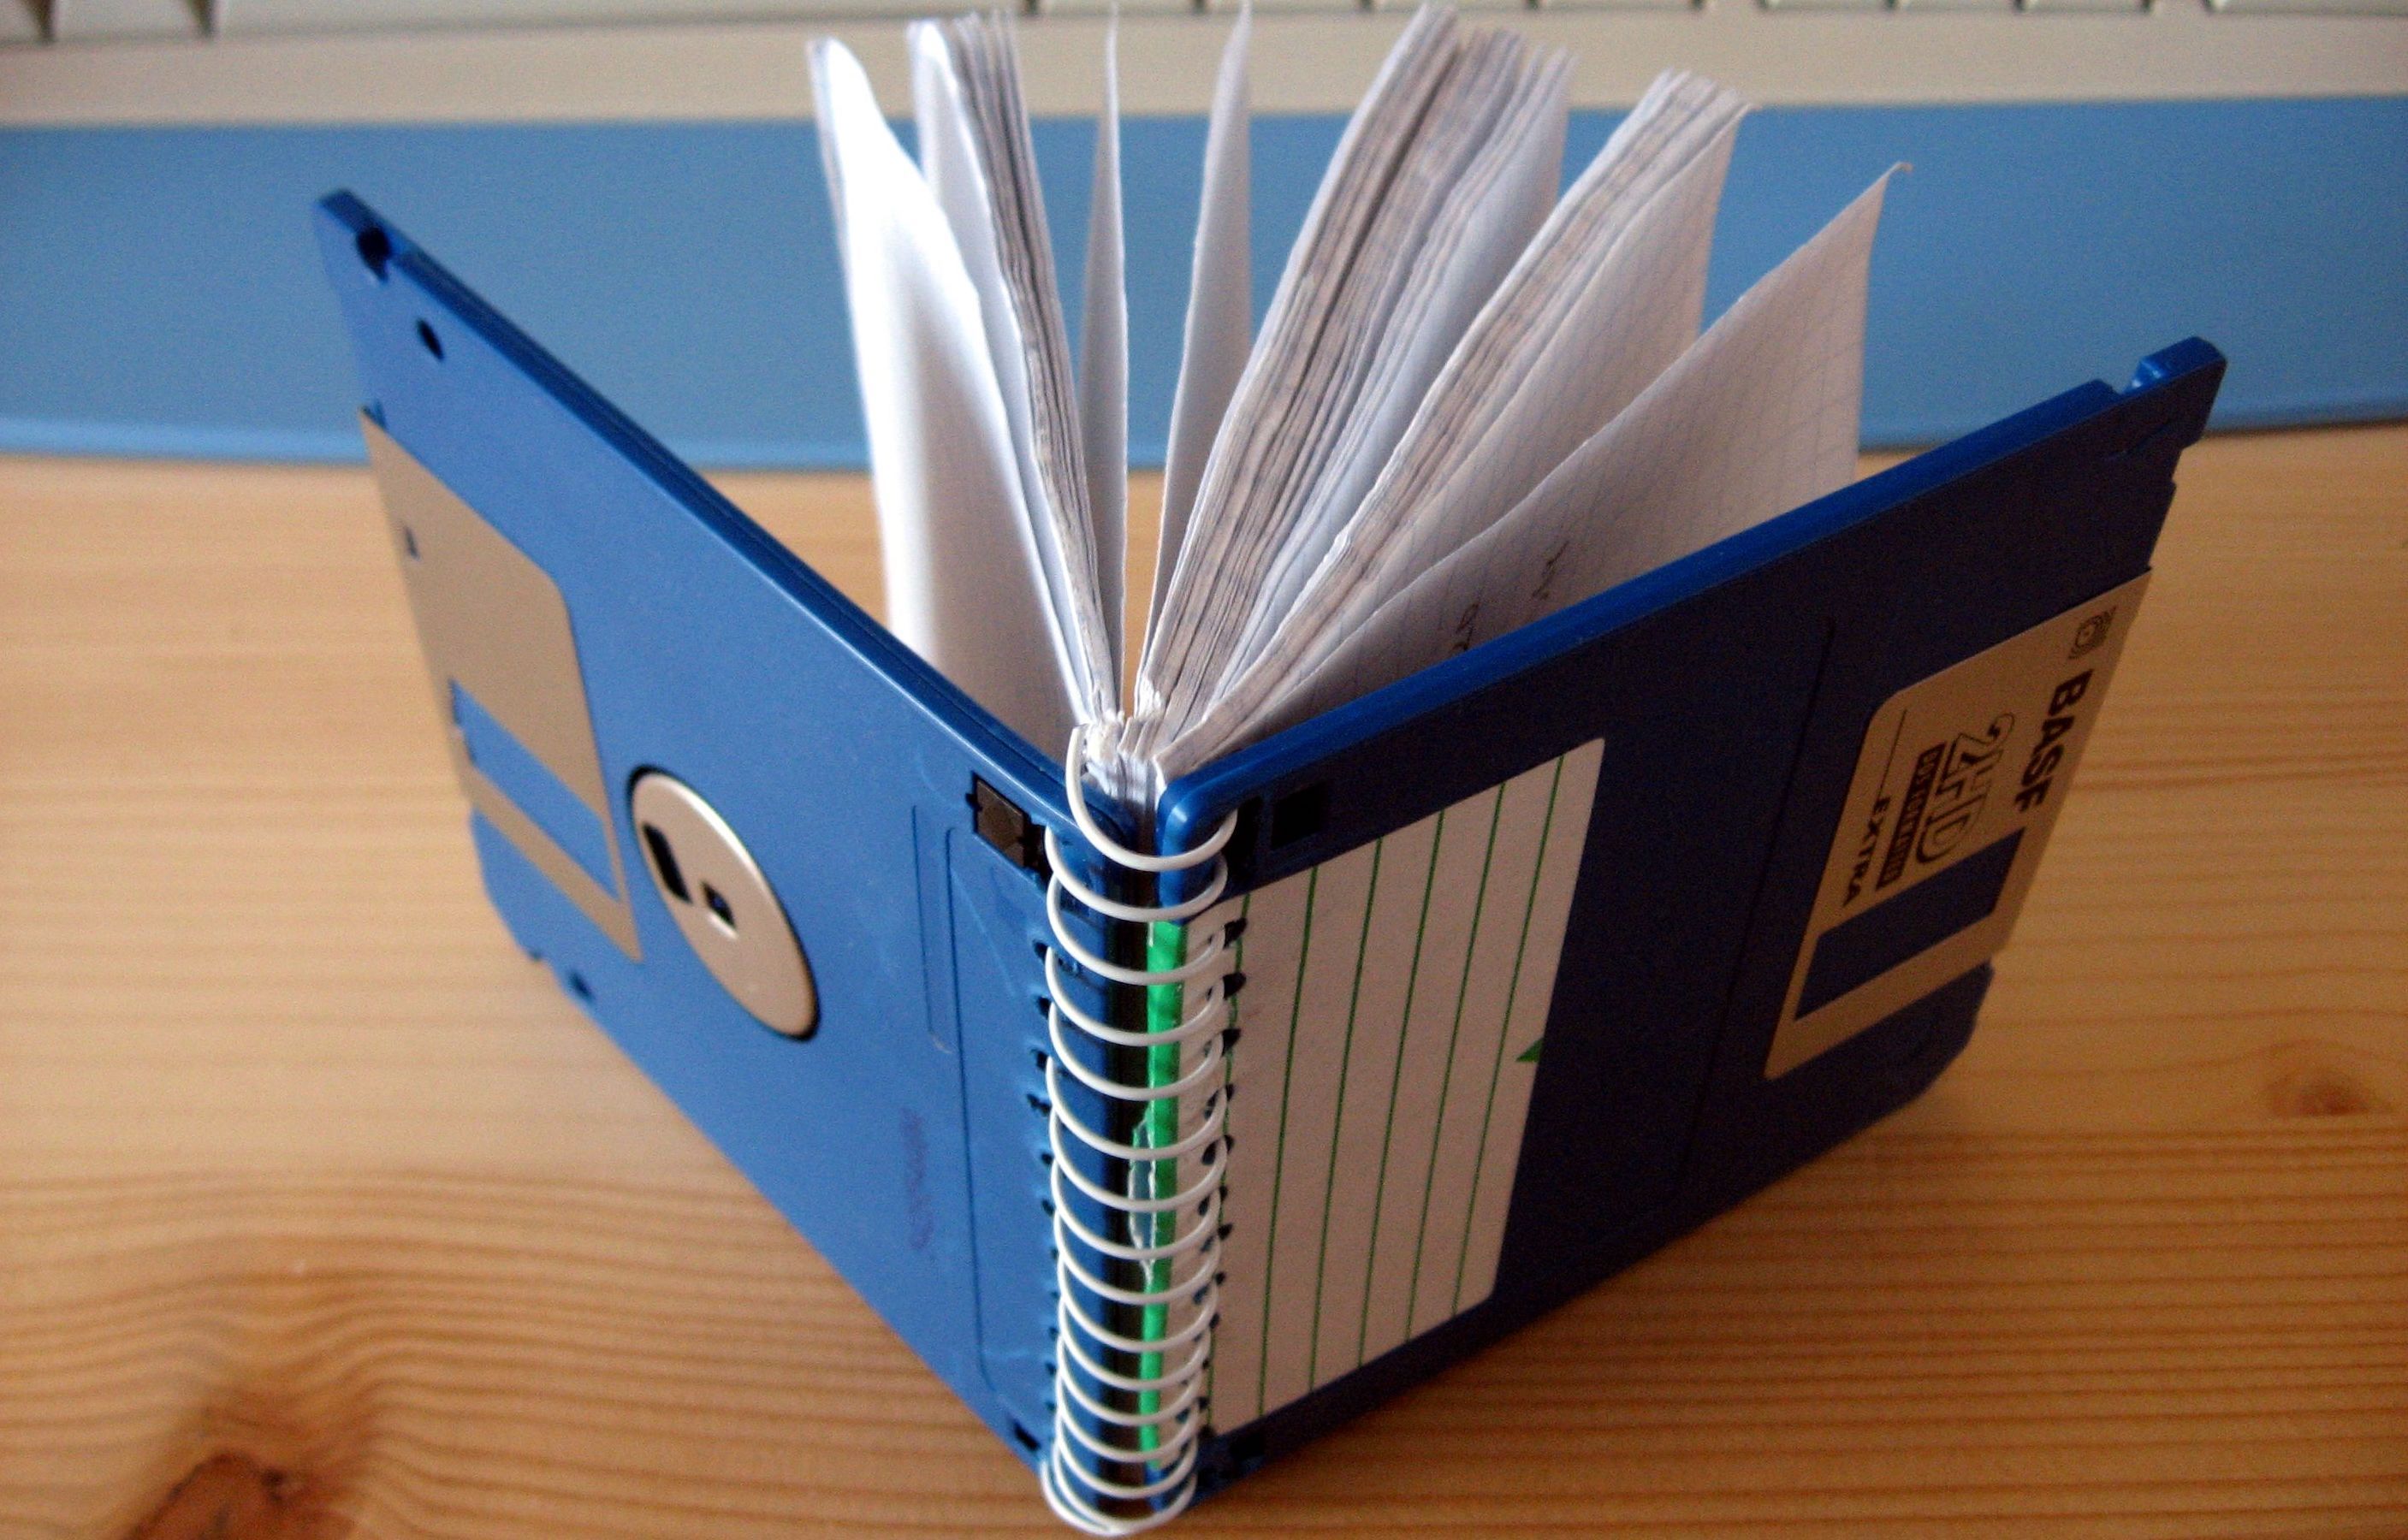 A close up shot of a notepad made with two floppy disks